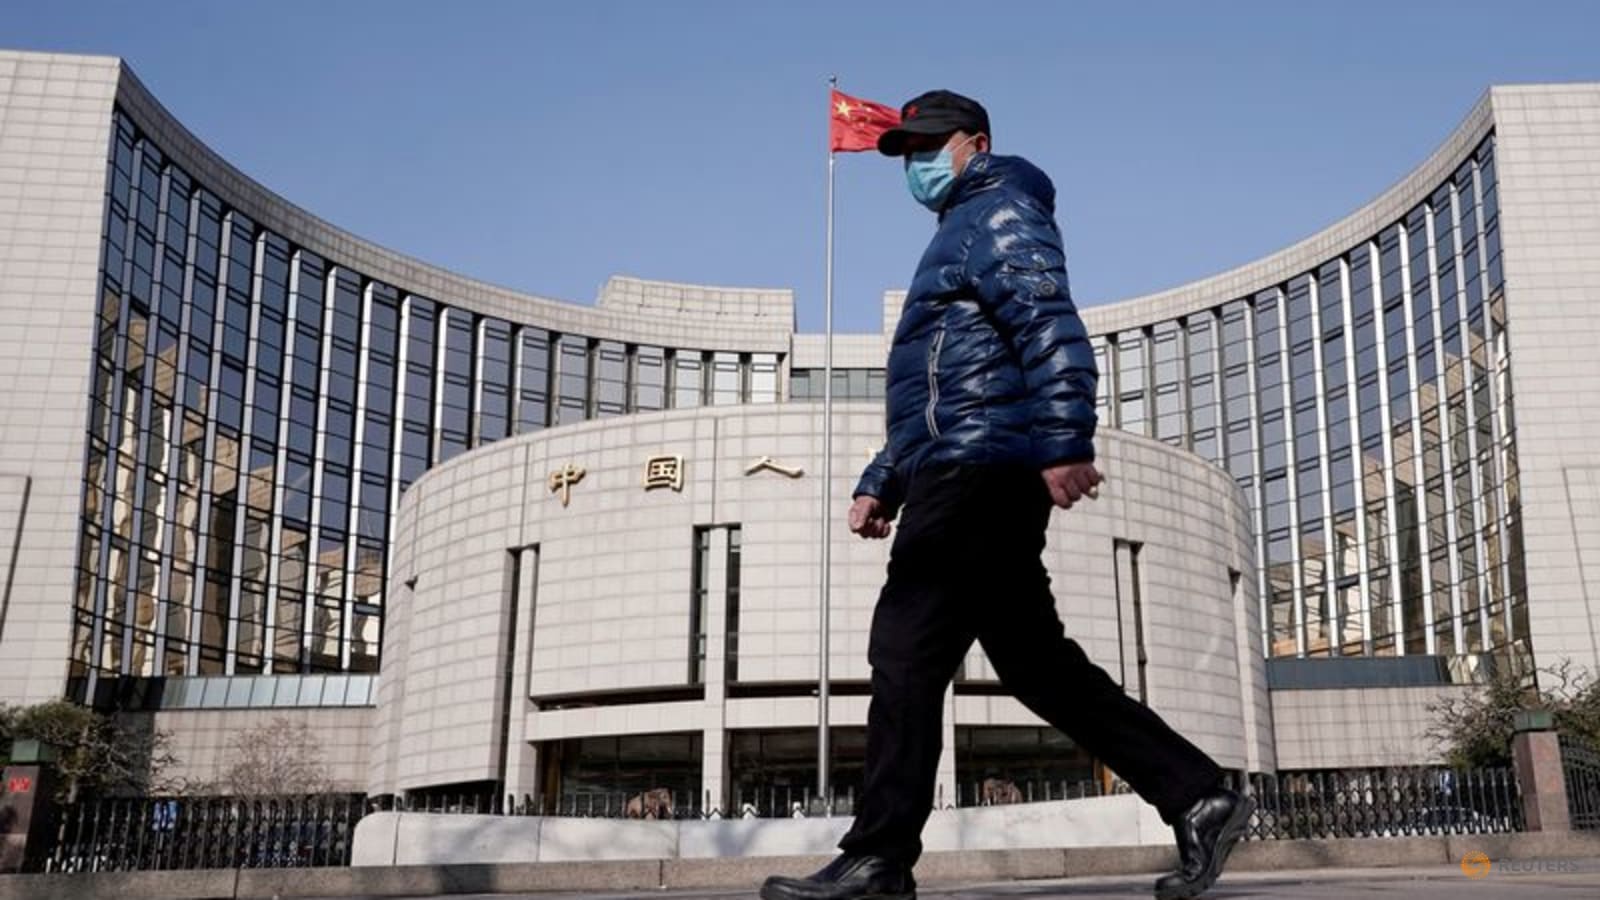 Exclusive-China central bank to offer cheap loans to support developers' bonds-sources thumbnail